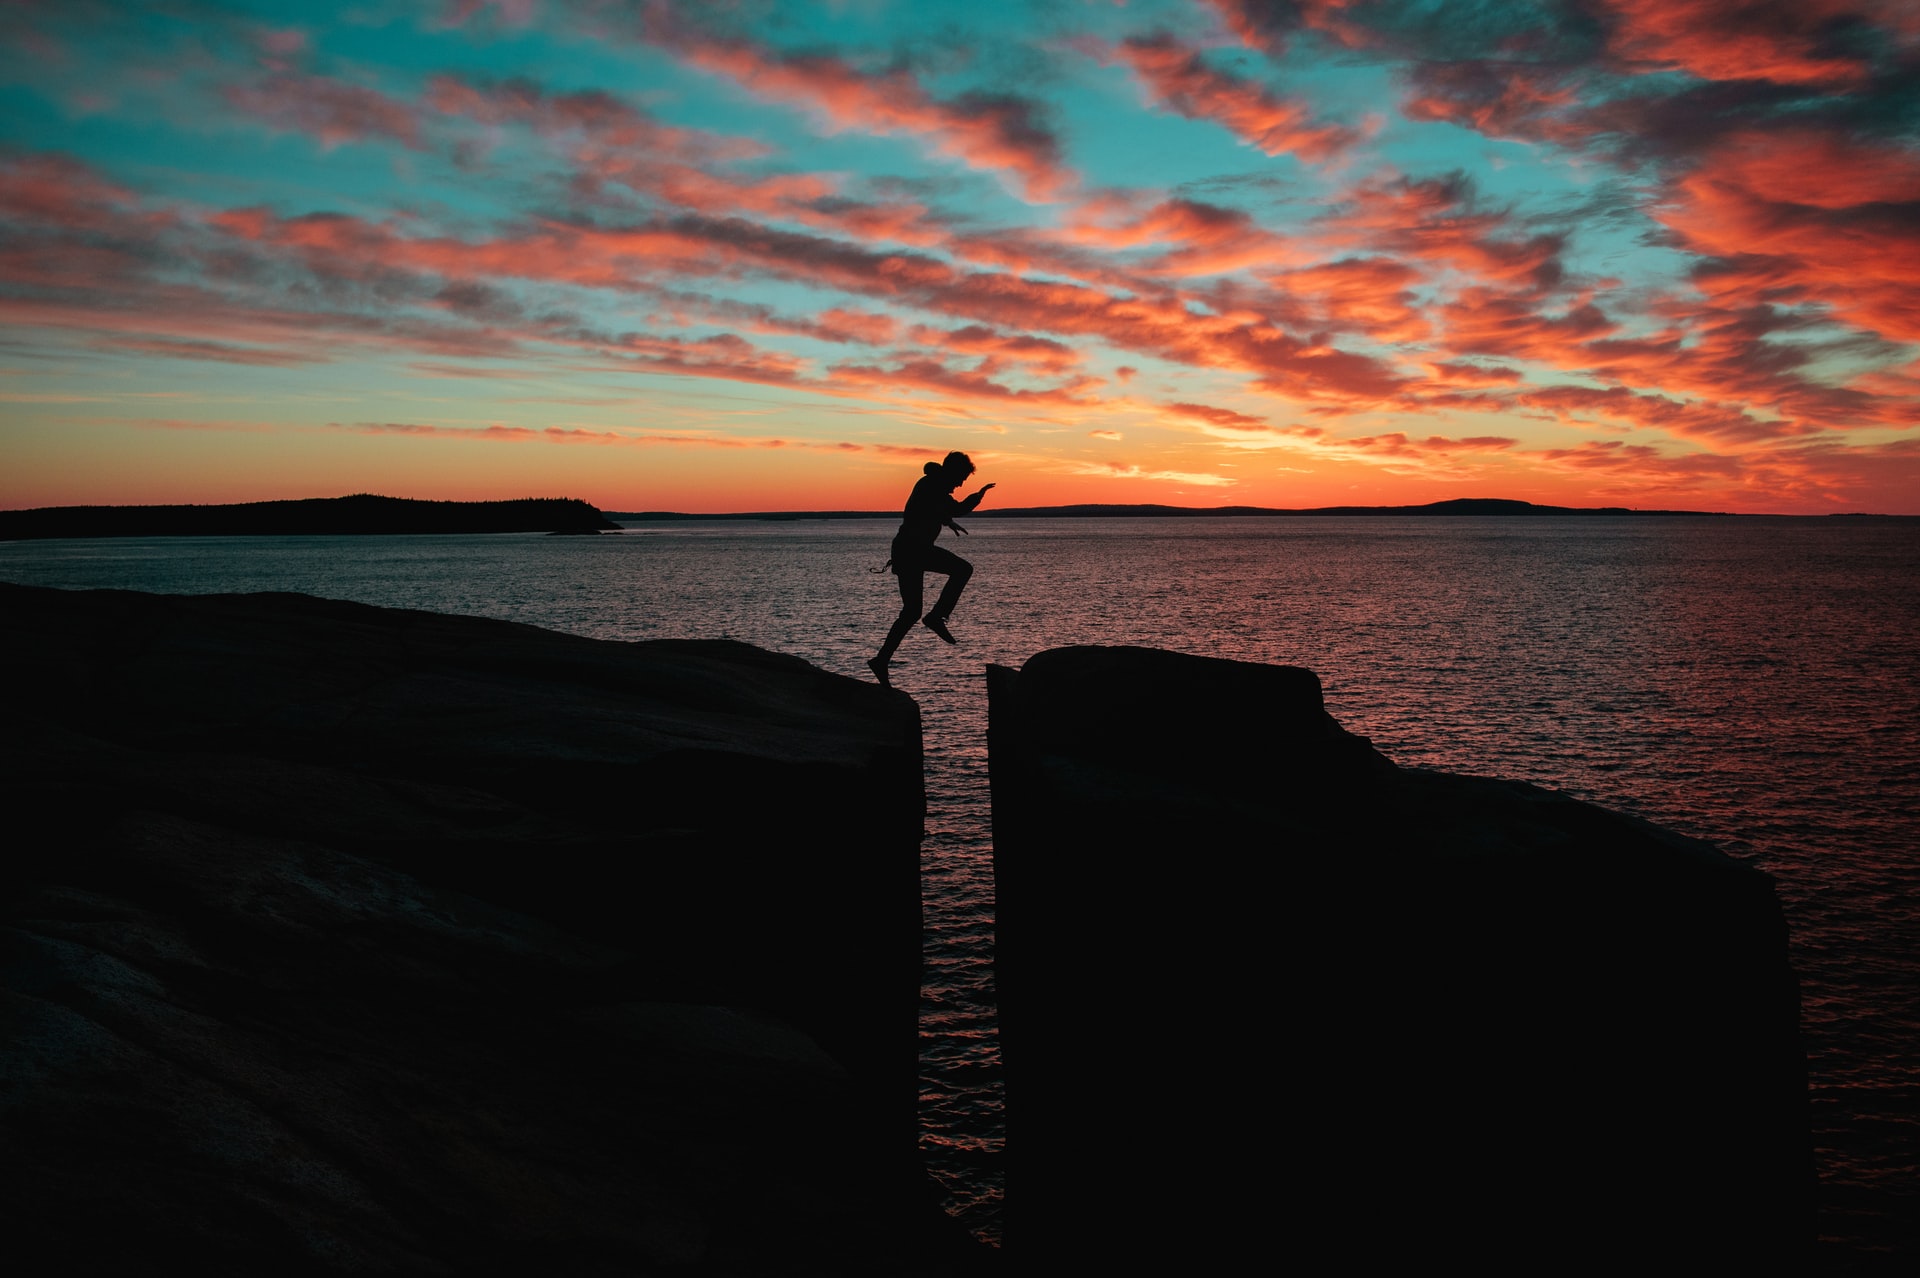 Silhouetted man hopping over a crevice at sunset.